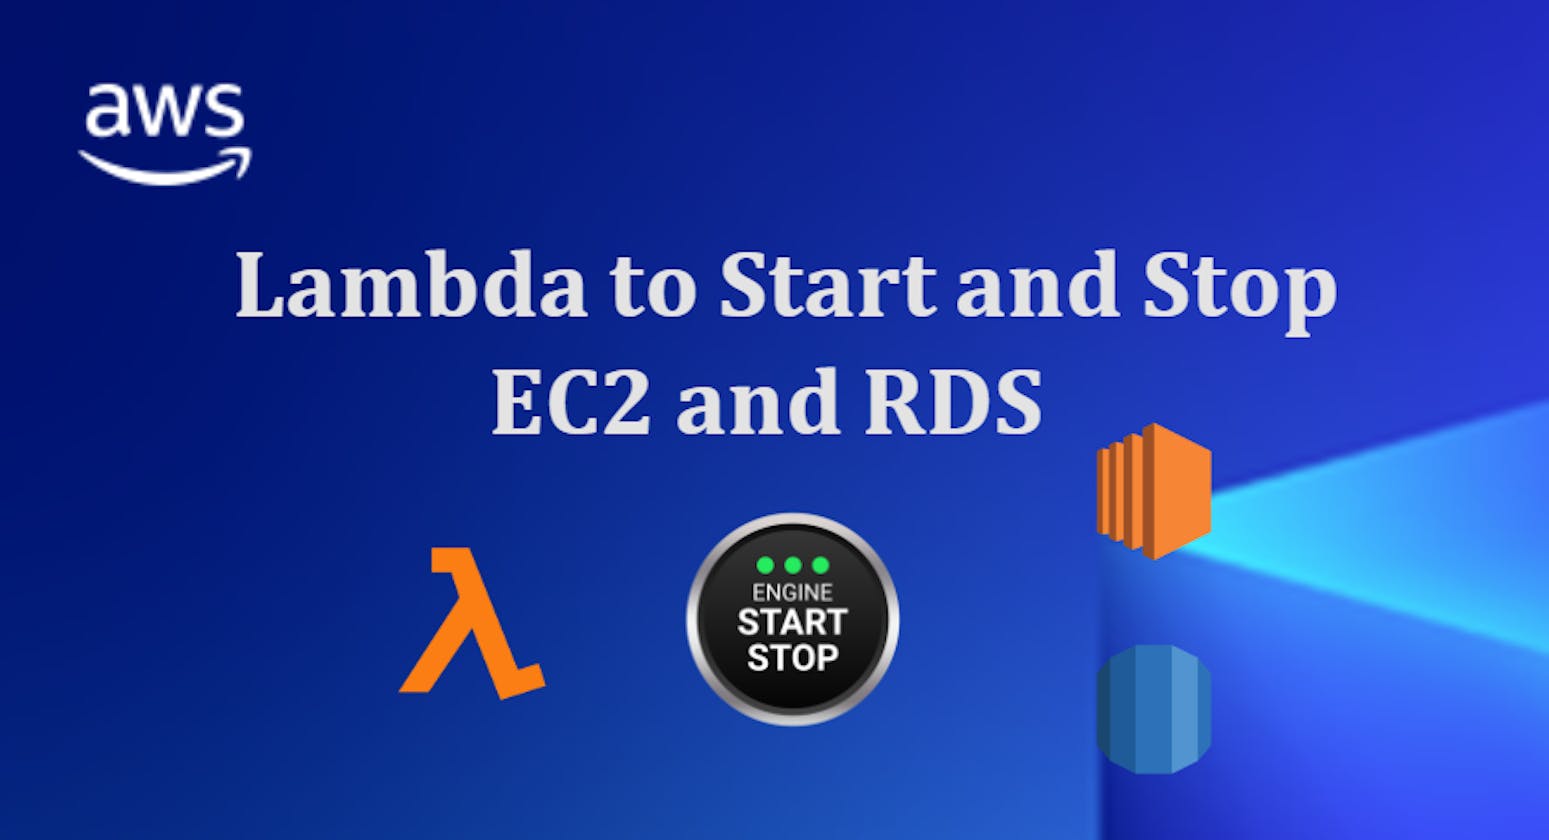 Automating EC2 and RDS Instance Management (start and stop ) with AWS Lambda